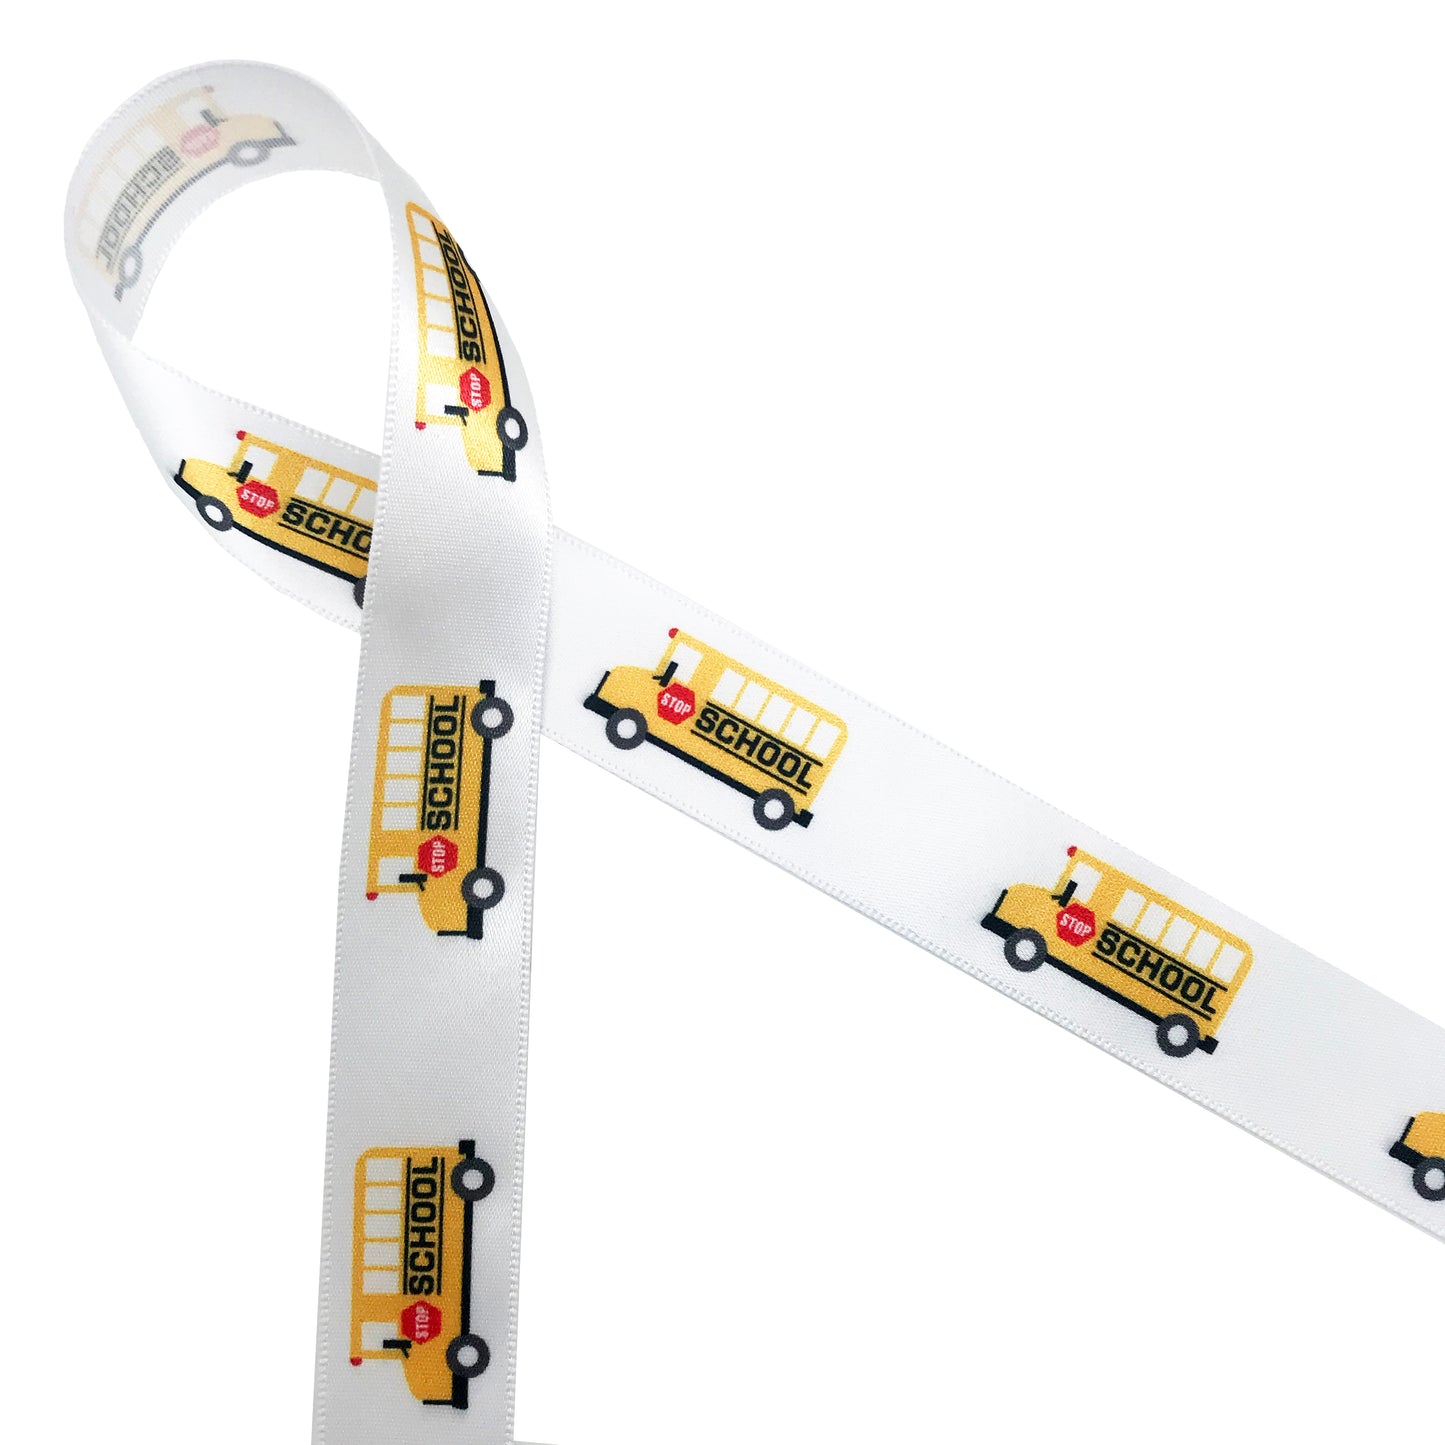 School bus ribbon yellow school buses in a row printed on 5/8"and 7/8" white satin